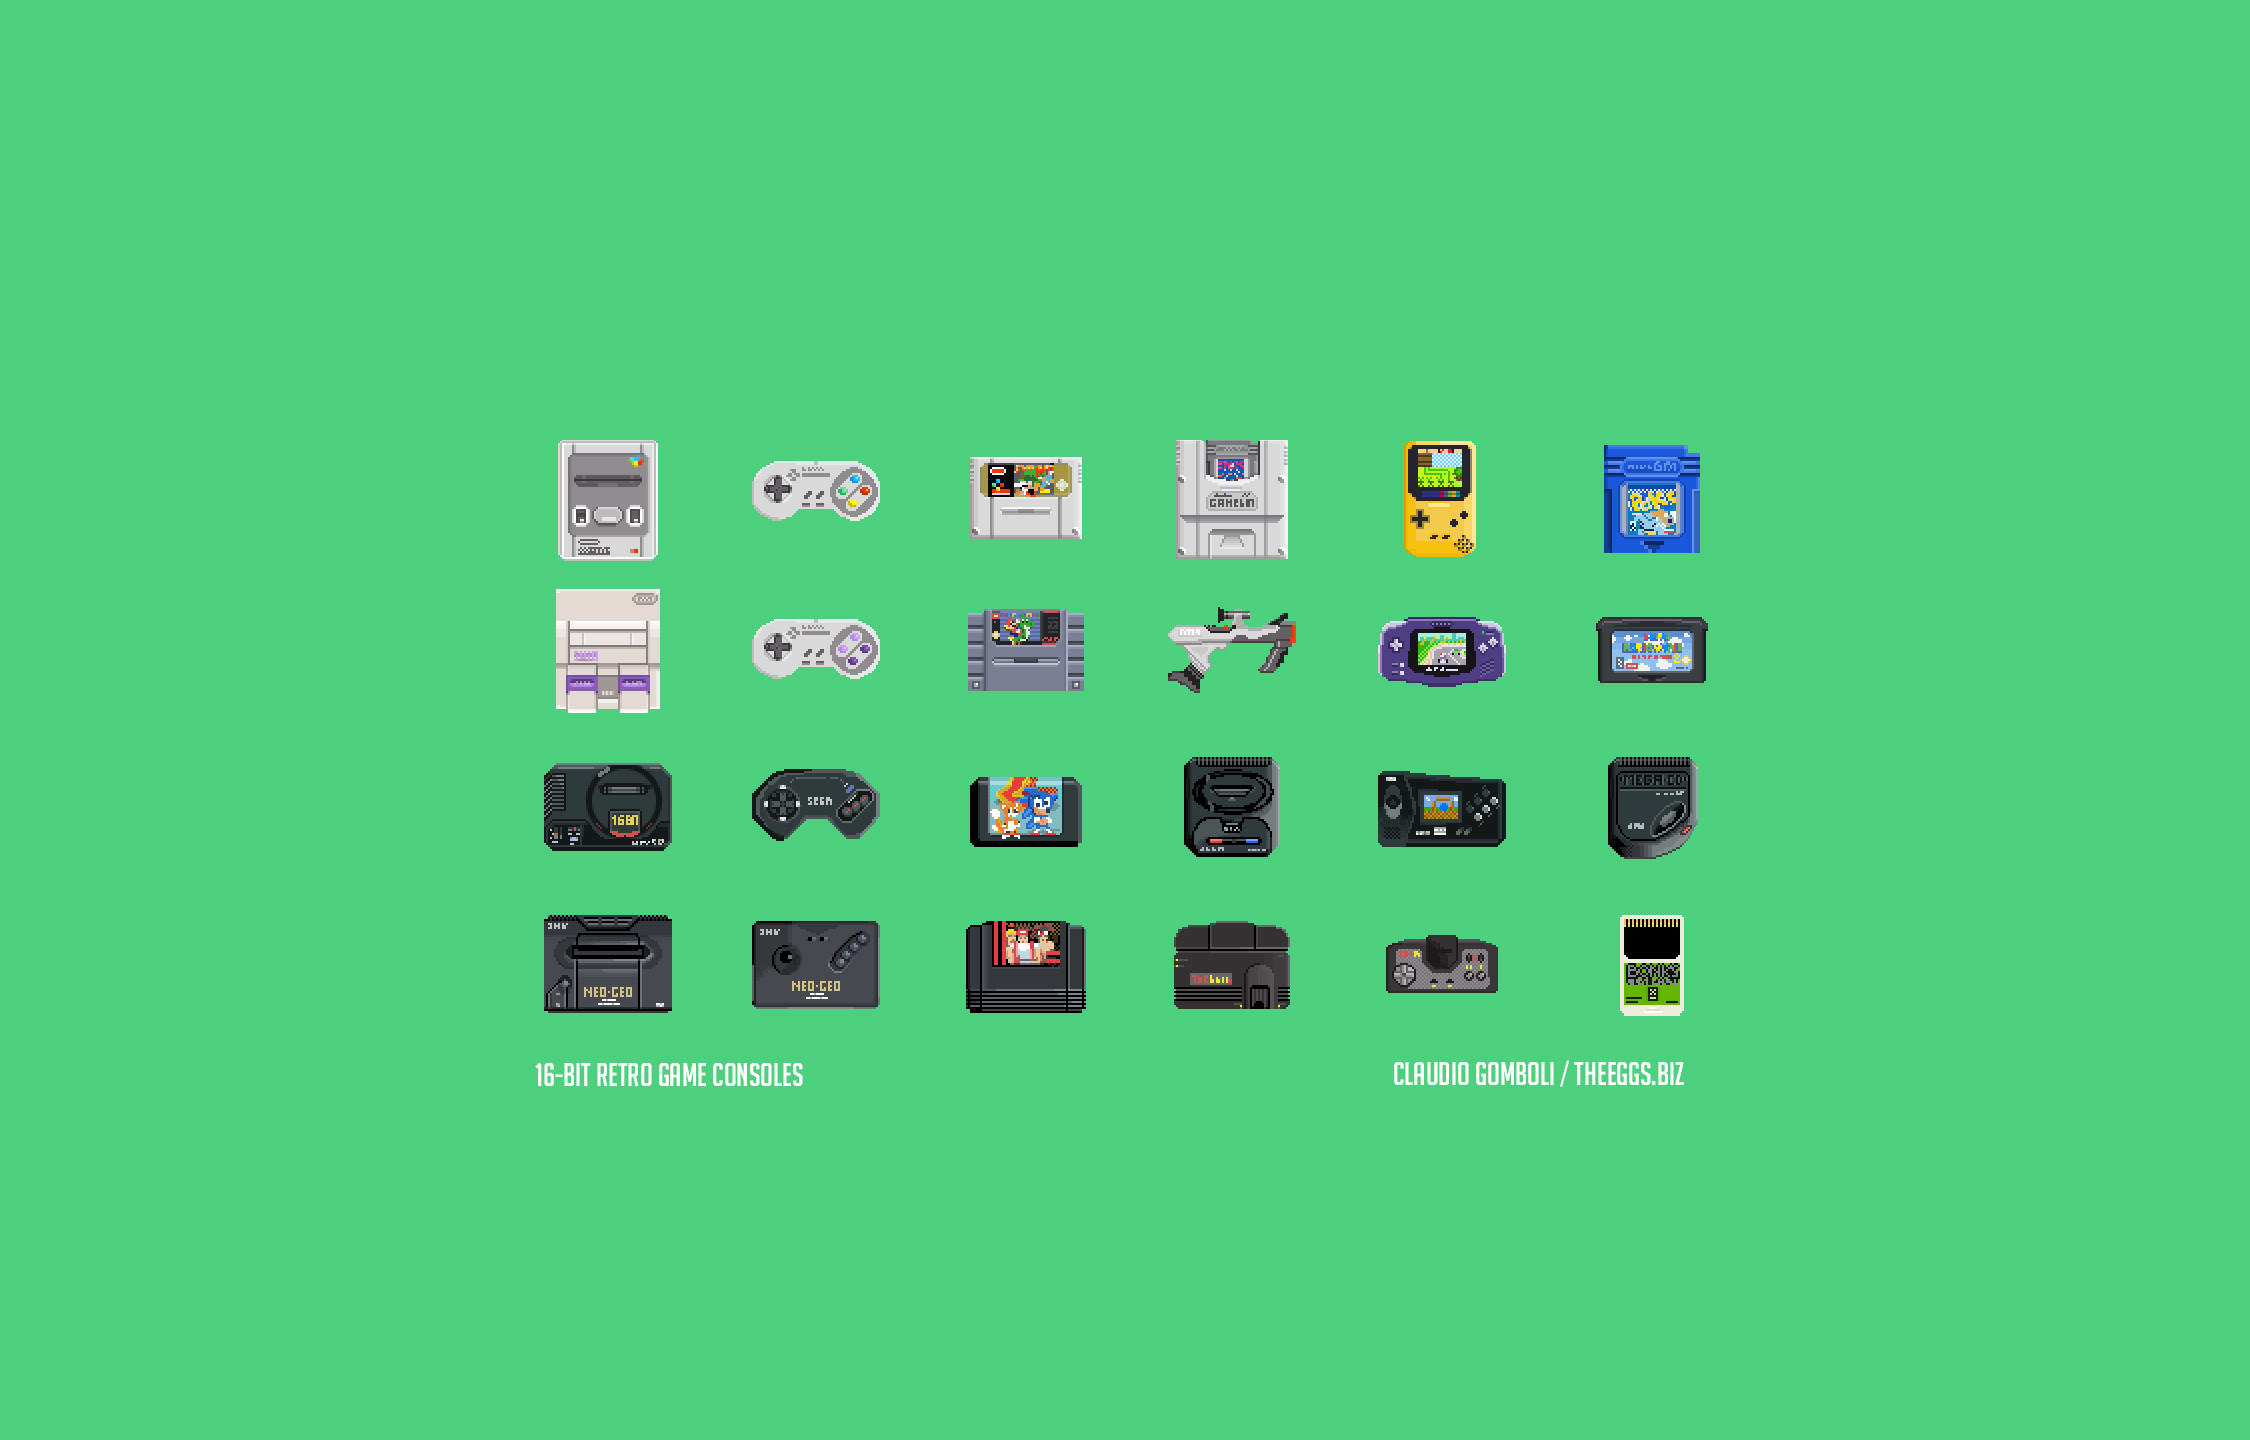 2250x1440 download 16 bit retro game console wallpapers for these devices